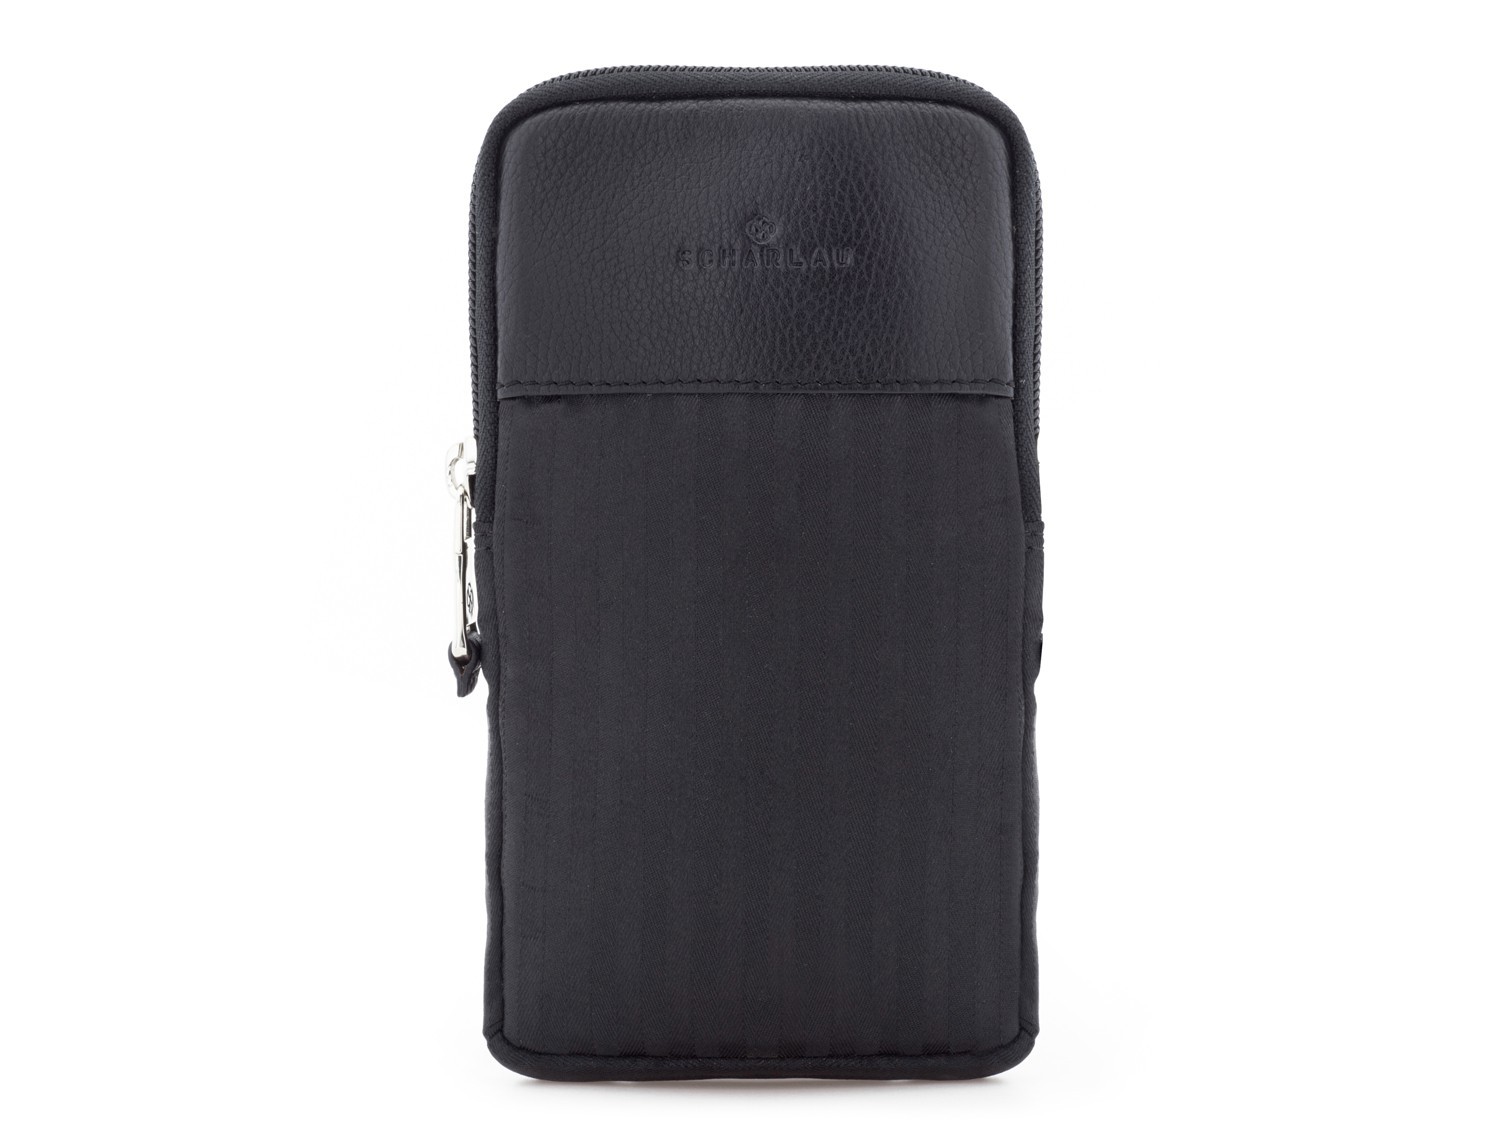 Multipurpose pouch in black front